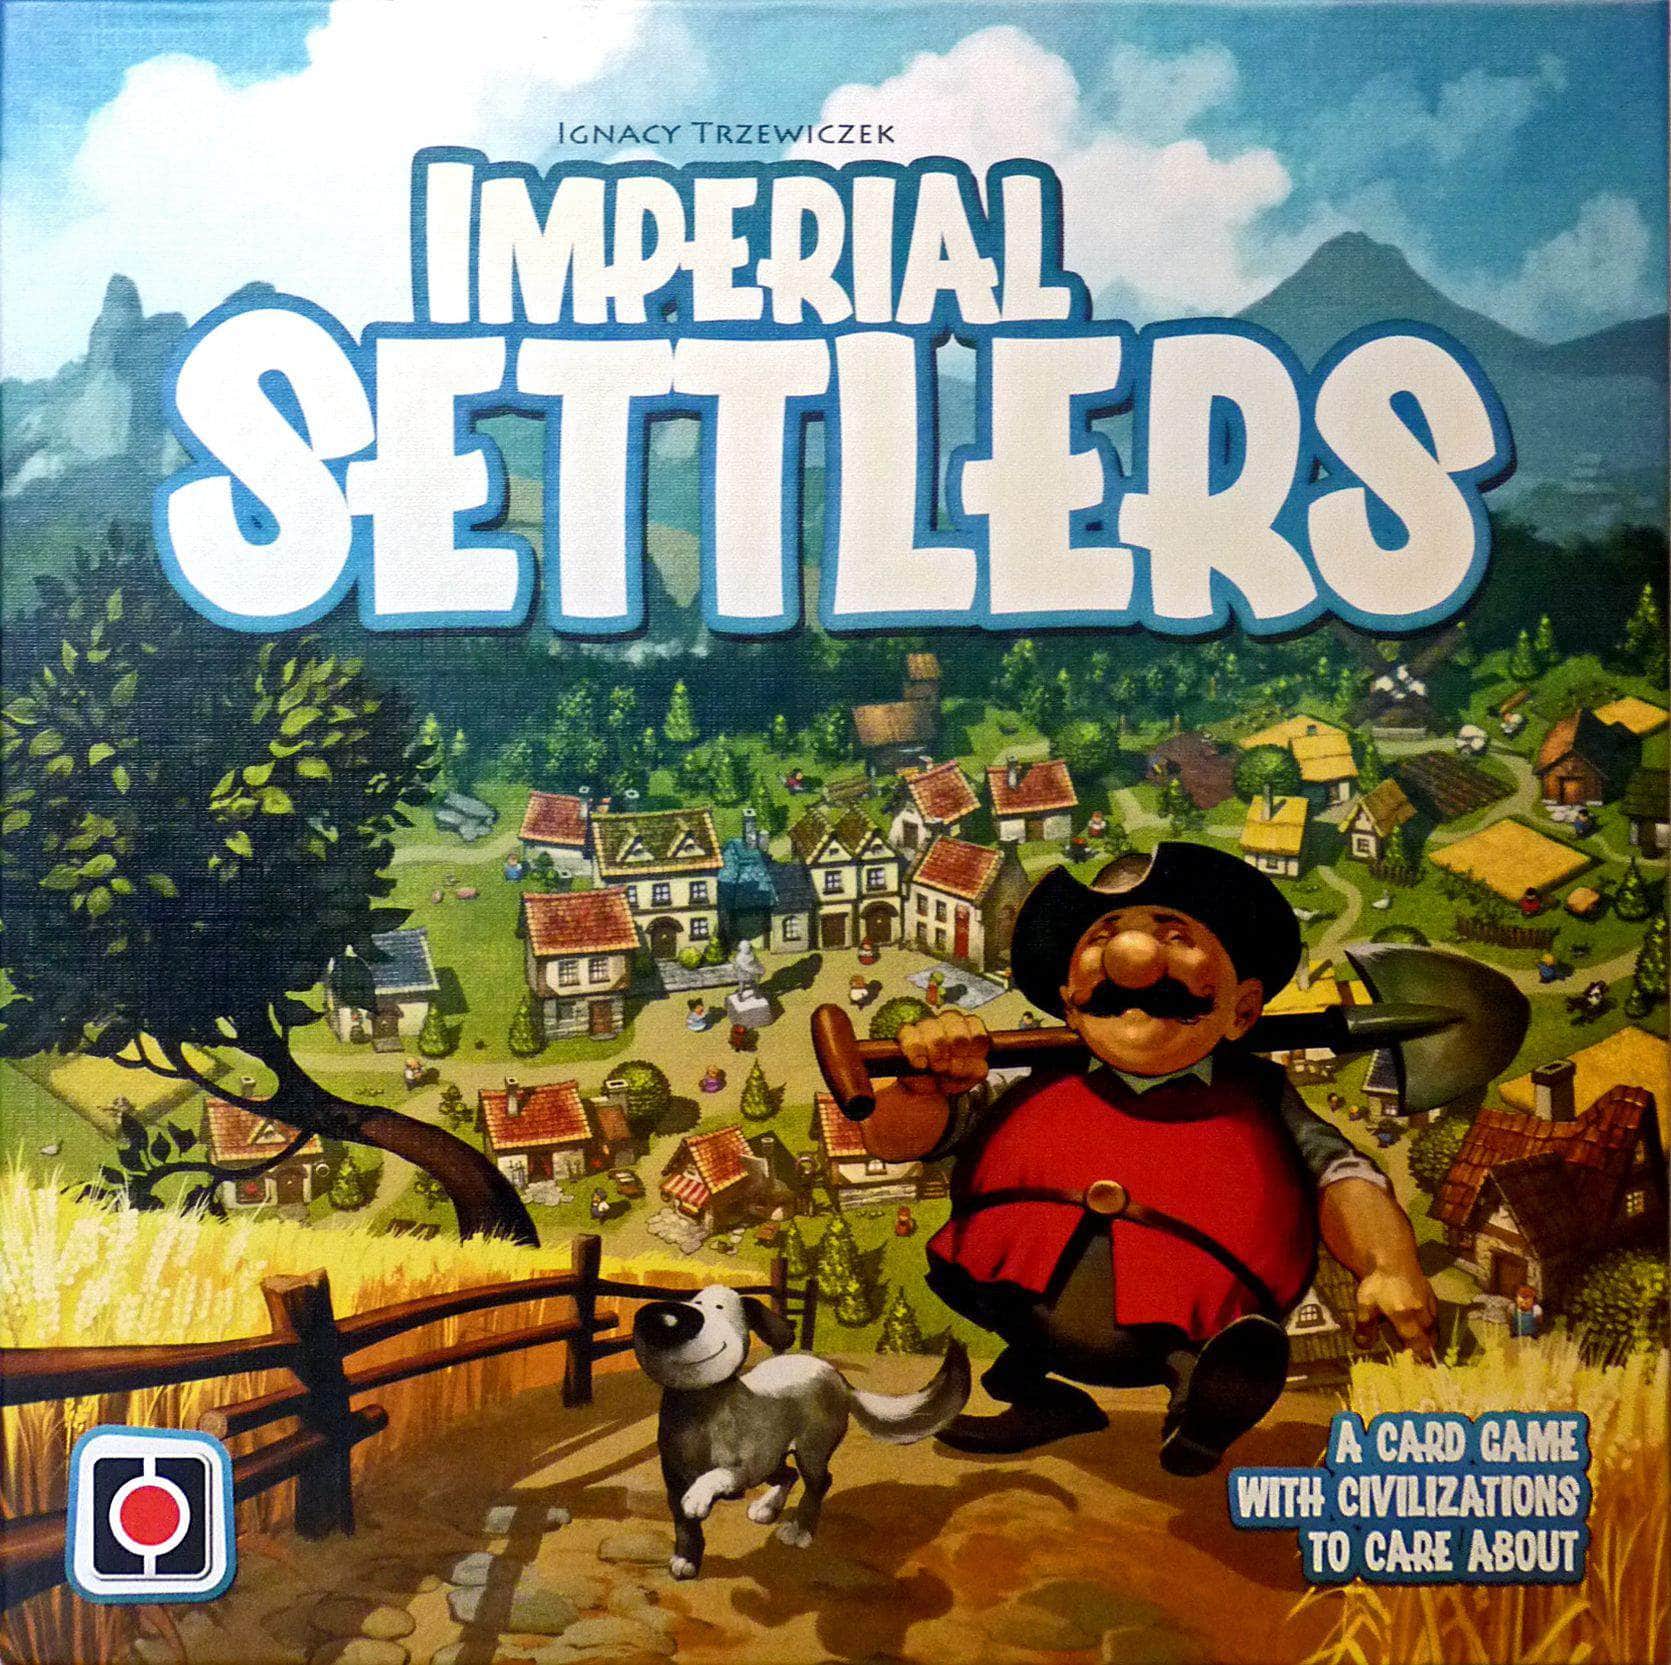 Imperial Settlers (Retail Edition) Retail Board Game Portal Games KS800395A